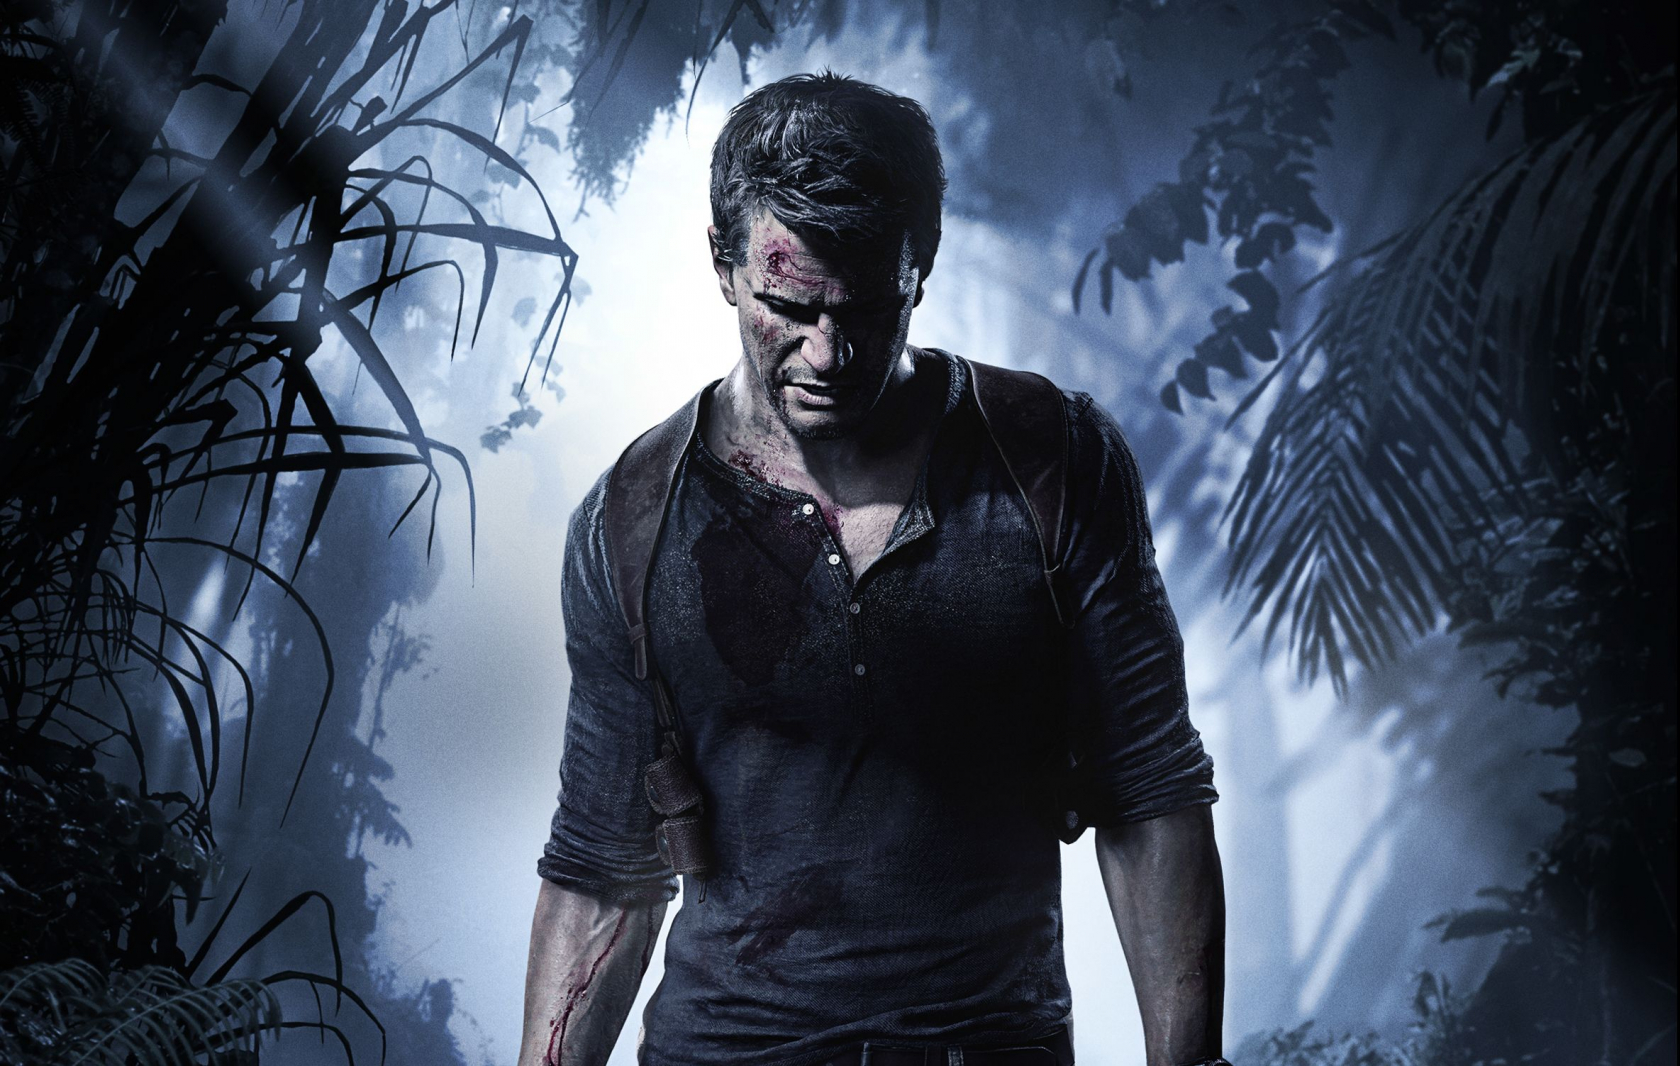 Naughty Dog denies claims that ex-employee was fired after being sexually harassed